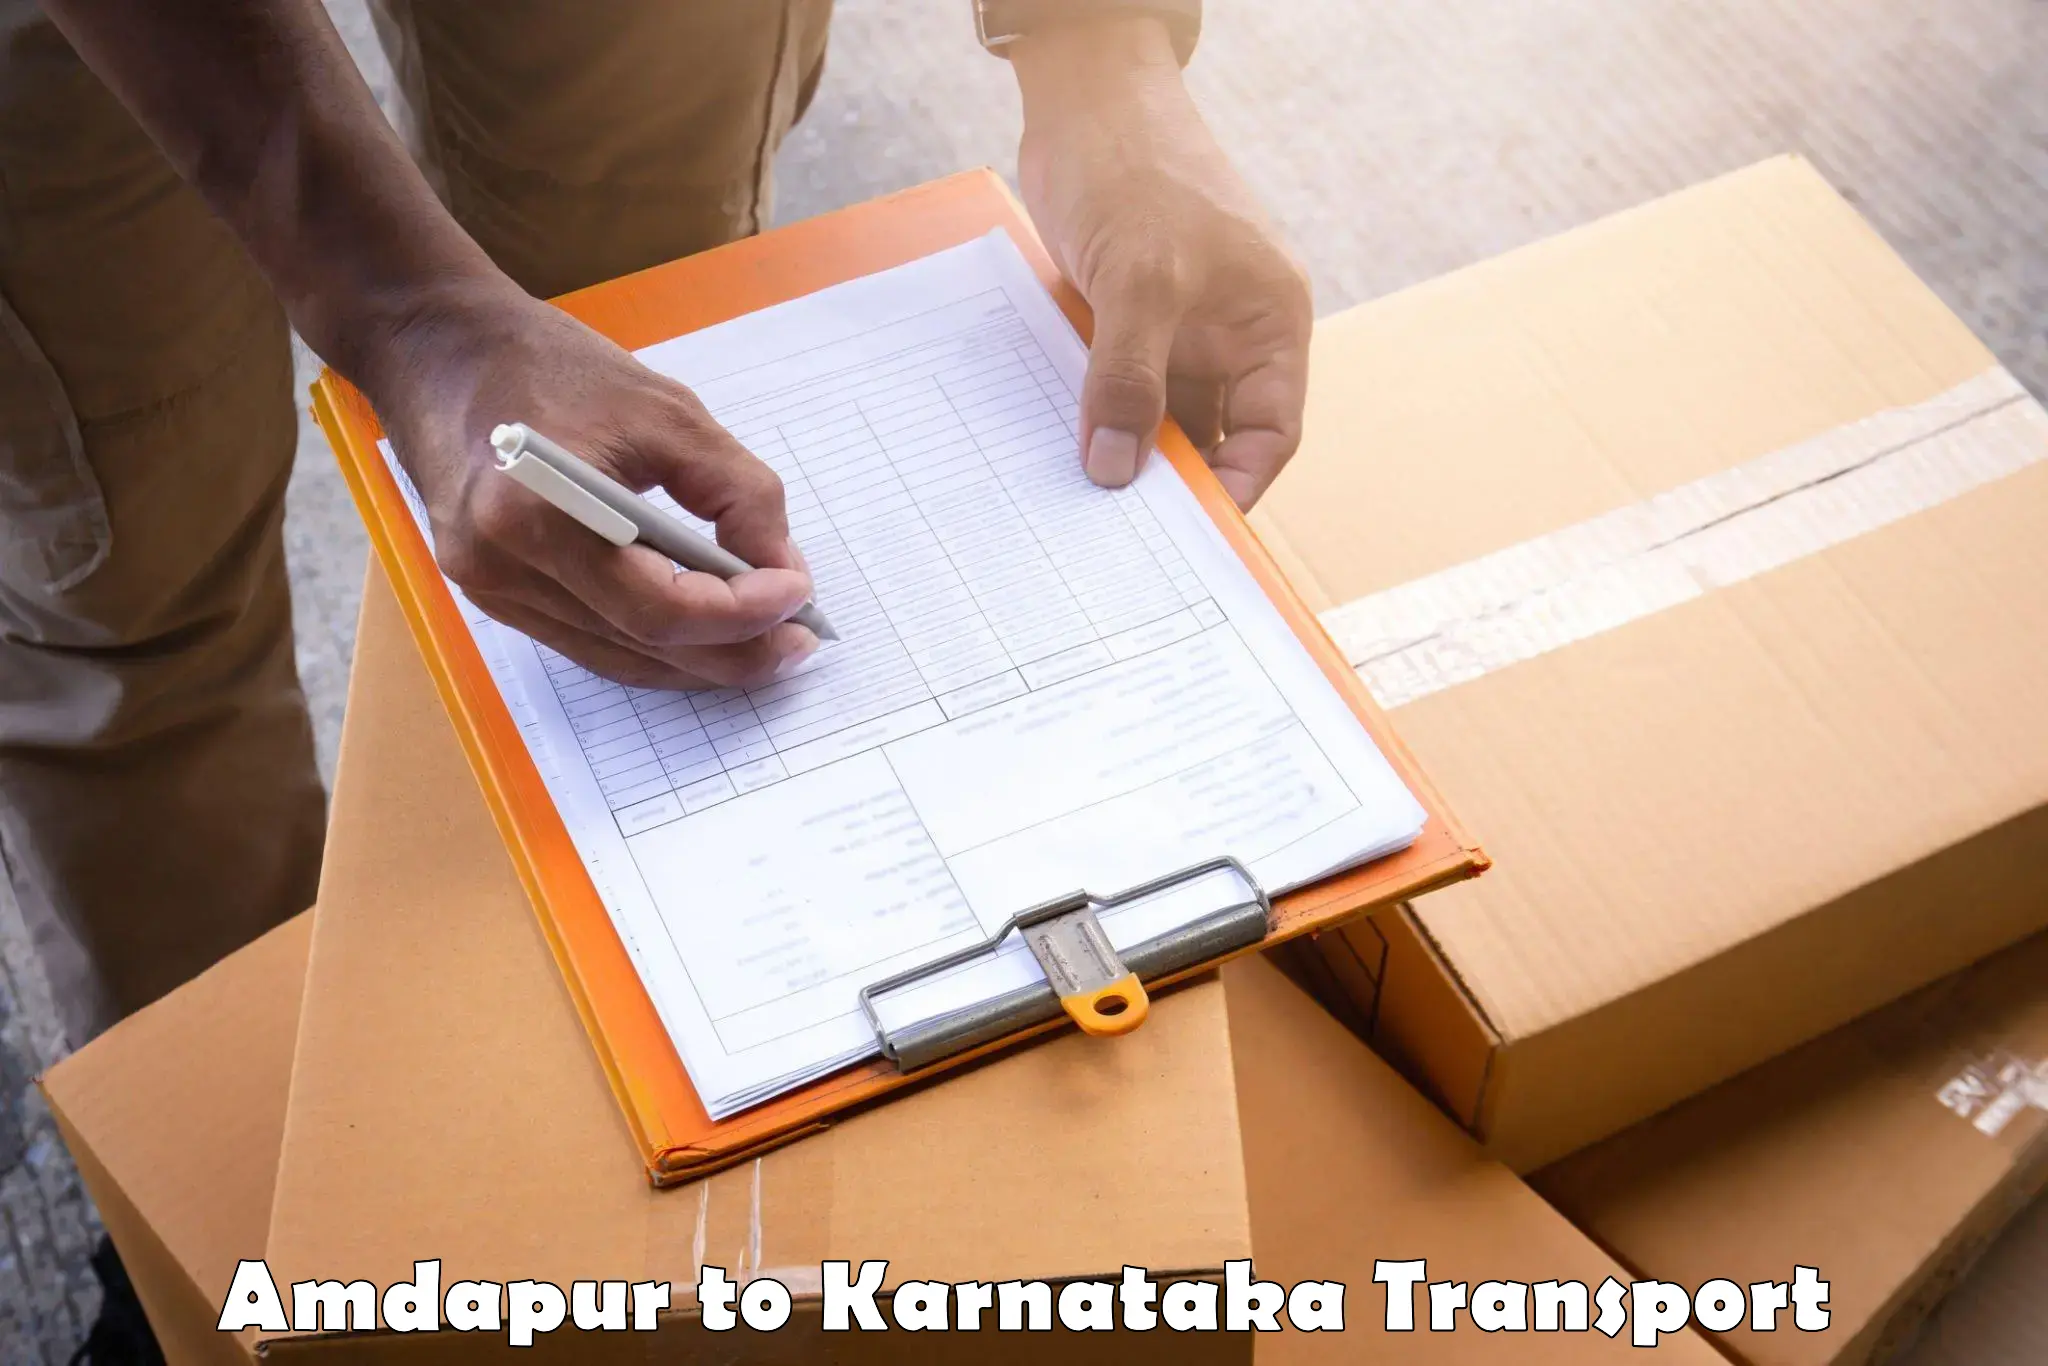 Daily transport service Amdapur to Kollegal